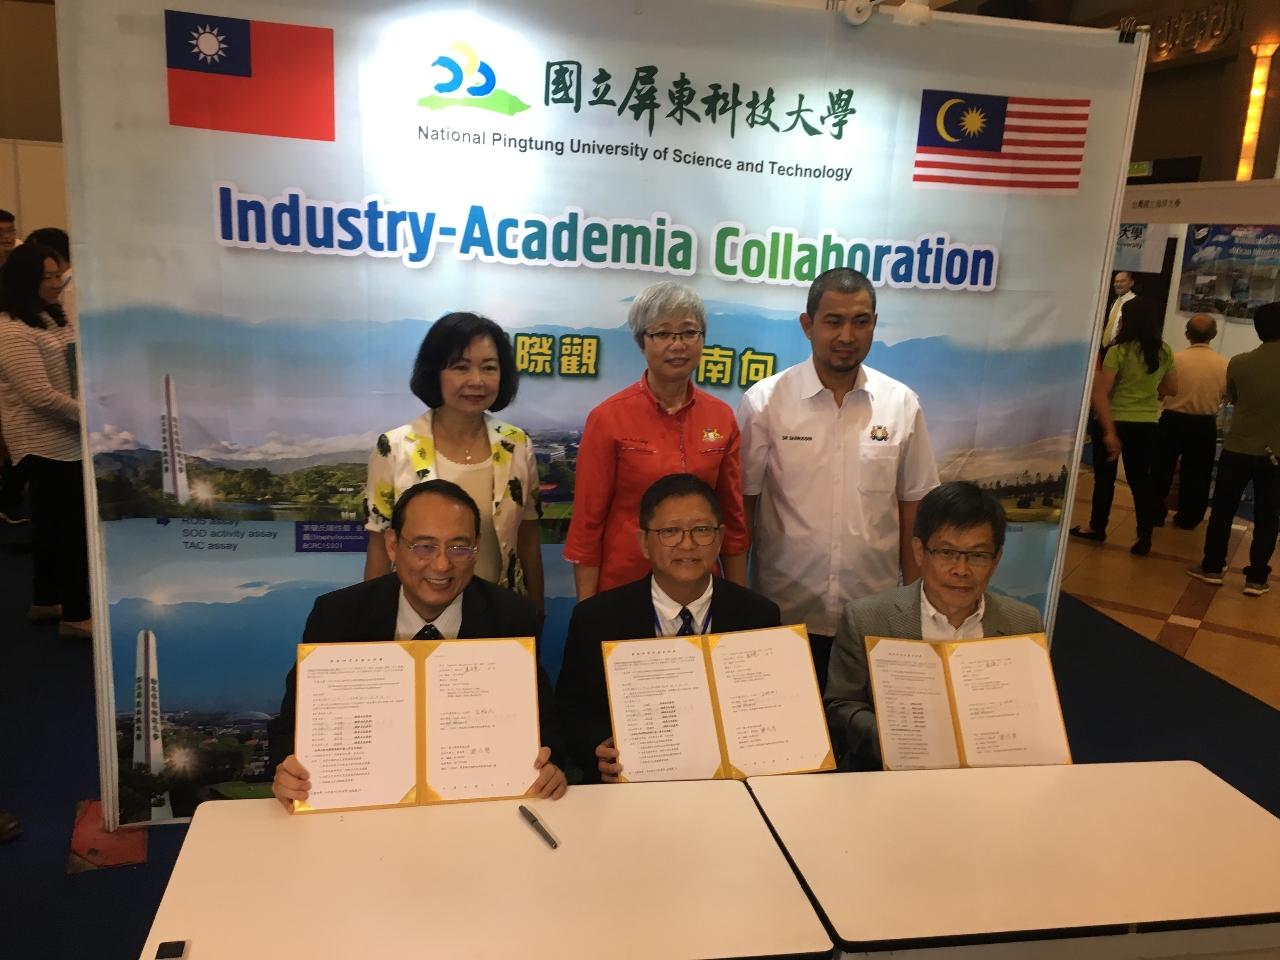 Representative Anne Hung (back row, left), Deputy Speaker of Johor State Legislative Assembly
for Penggaram Gan Peck Cheng (back row, center) and Dr Sahruddin Bin Jamal Chairman of the State Health, Environment and Agriculture Committee (back row, right) witnessed the signing of letter of intent for cooperation between National Pingtung University of Science and Technology and Pingtech, an enterprise of alumnus of National Pingtung University of Science and Technology.